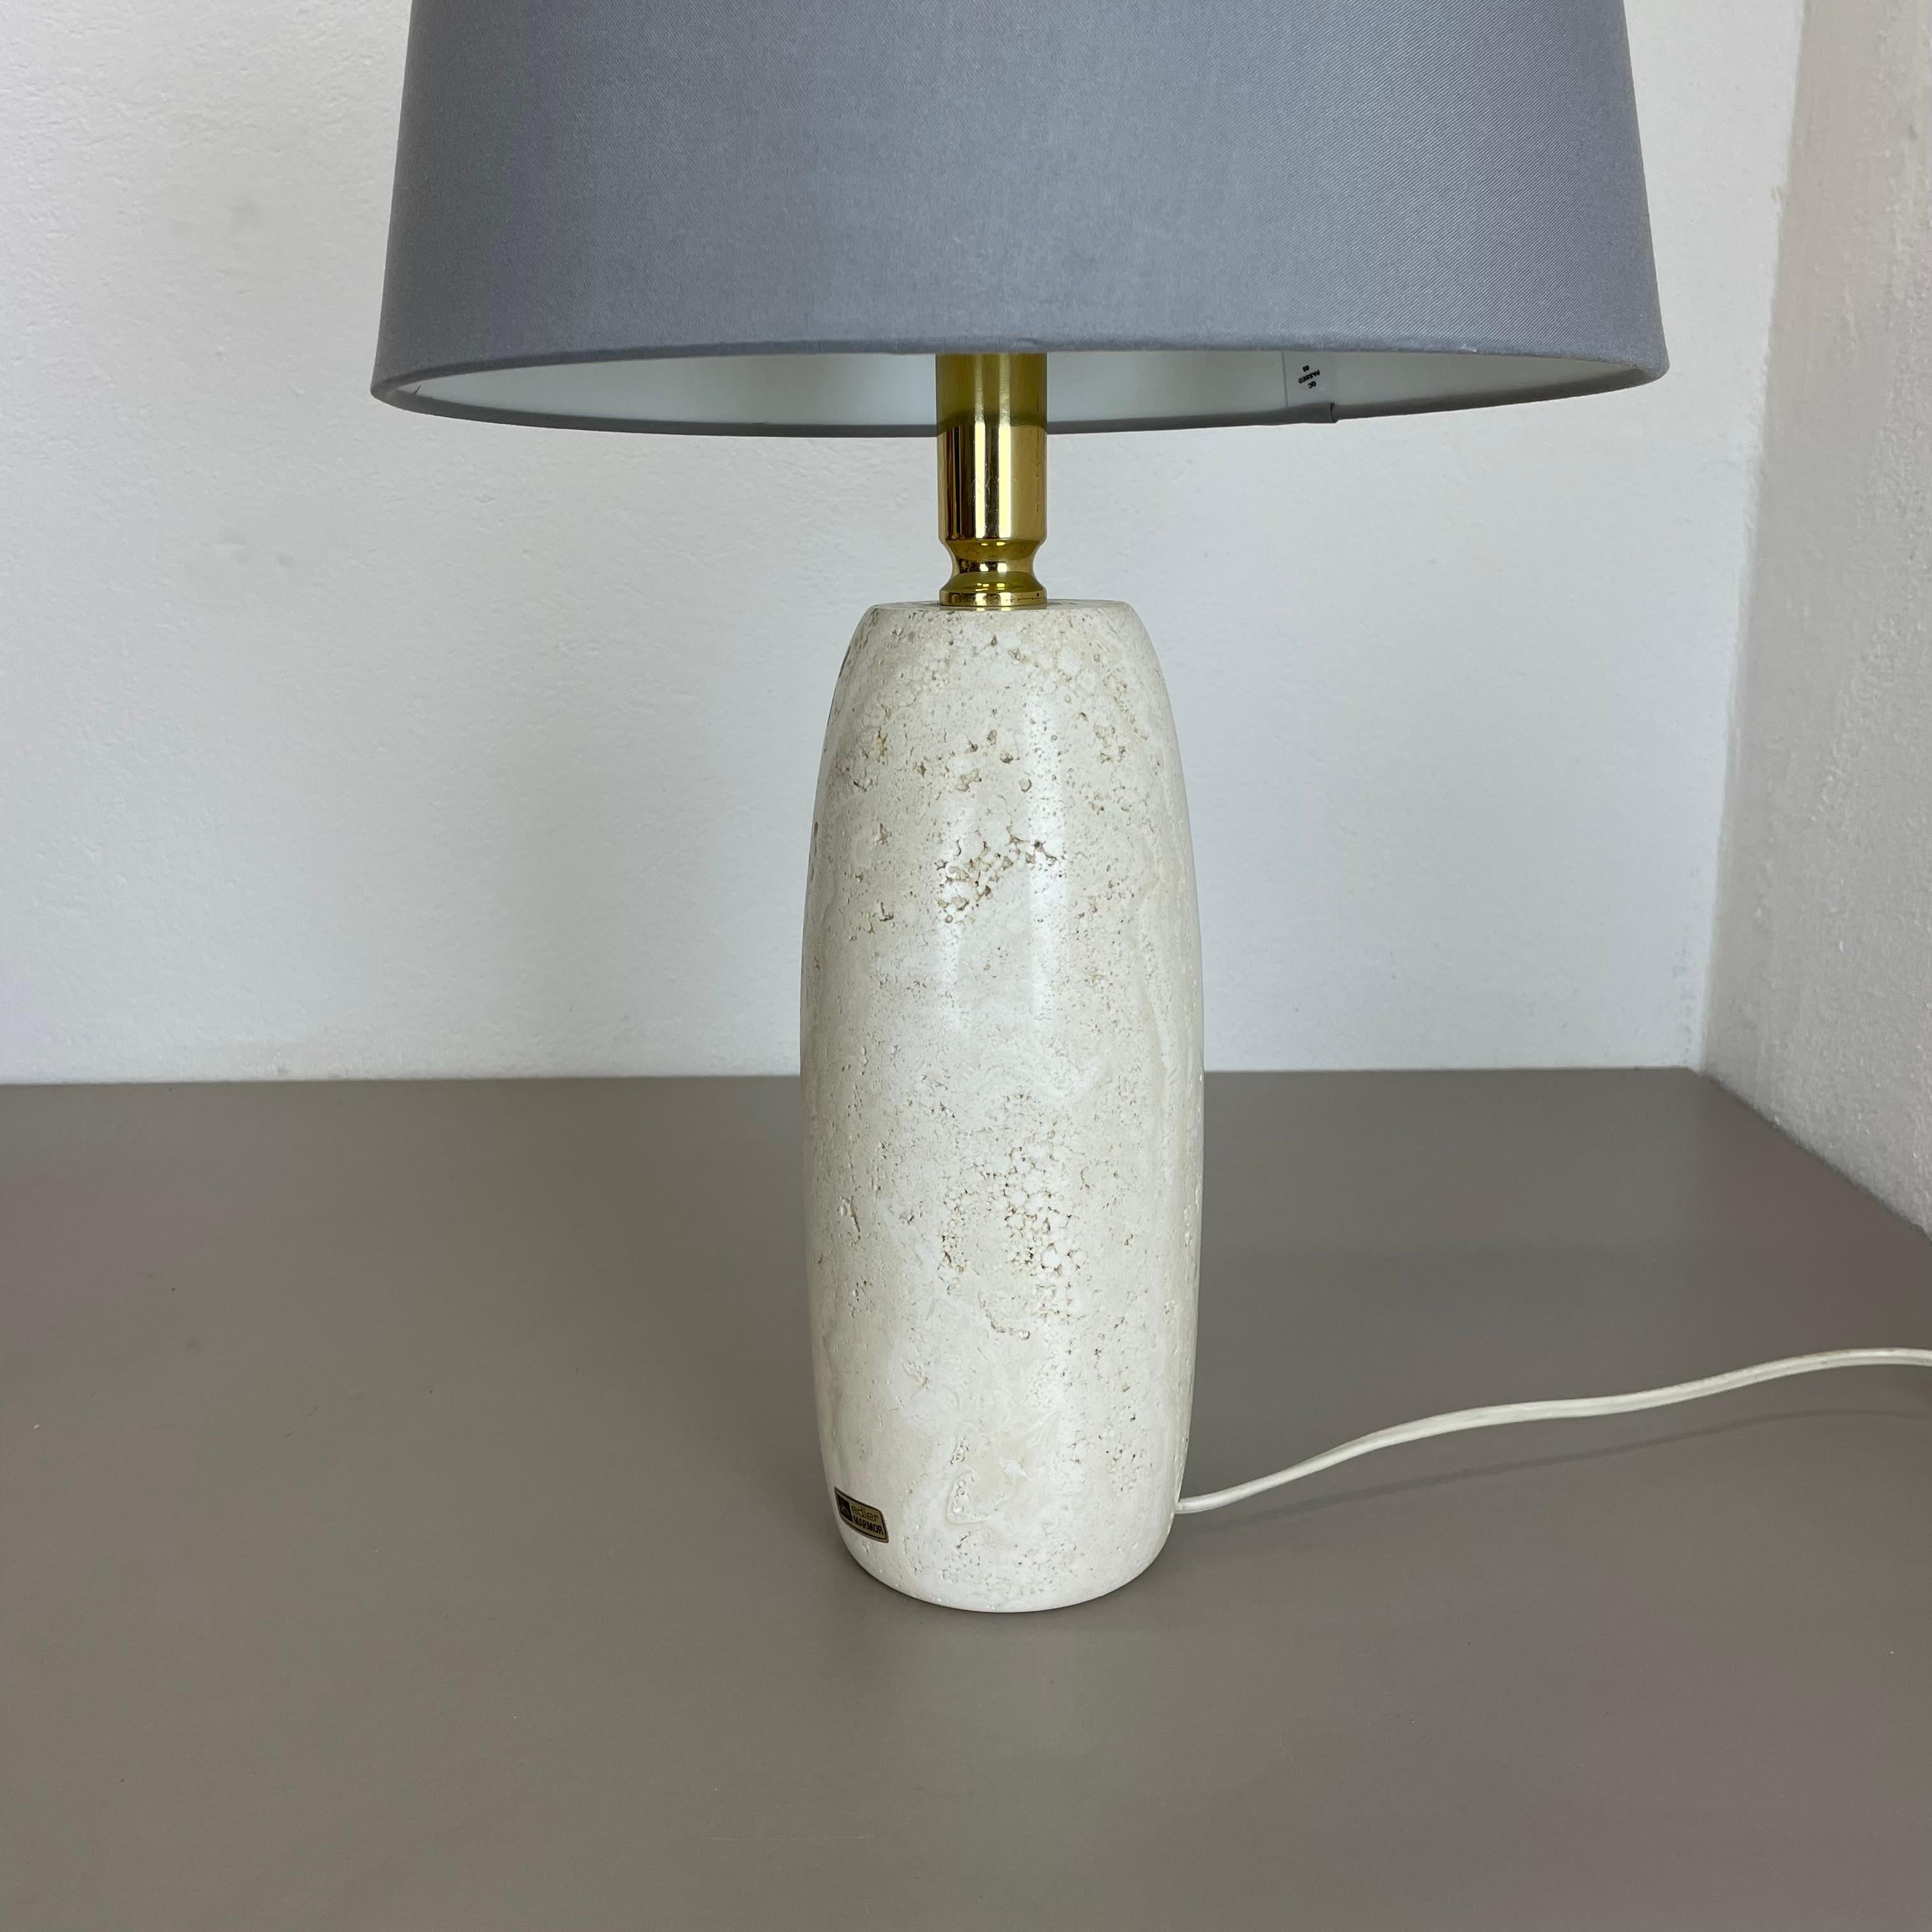 Italian 6.4kg Travertine Marble Fratelli Mannelli Style Table Light Base, Italy, 1970s For Sale